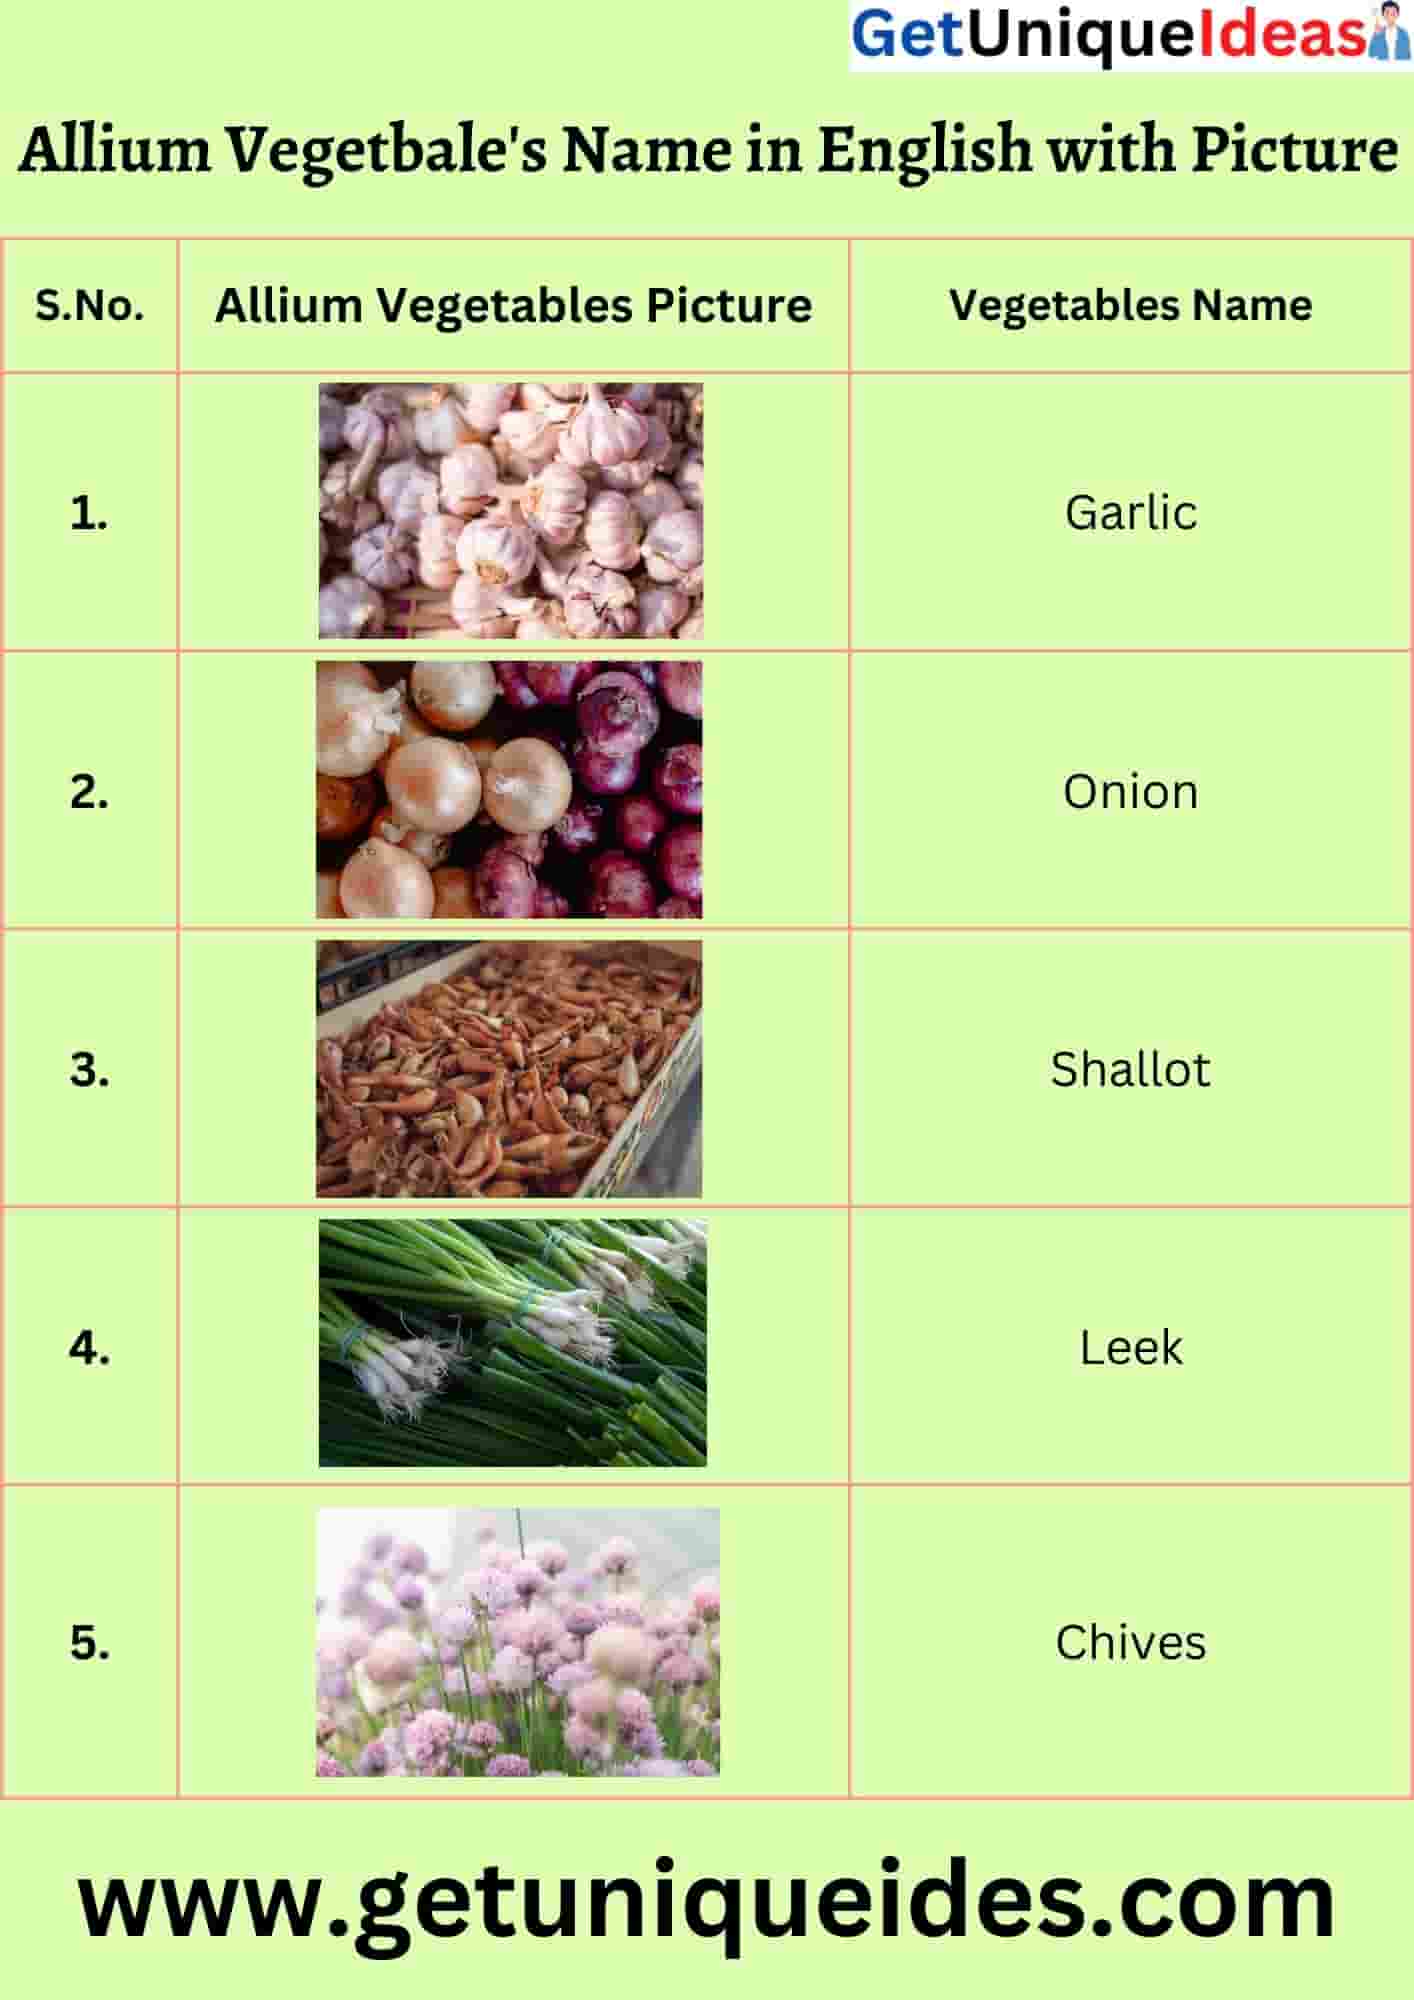 Allium Vegetable's Name in English with Picture